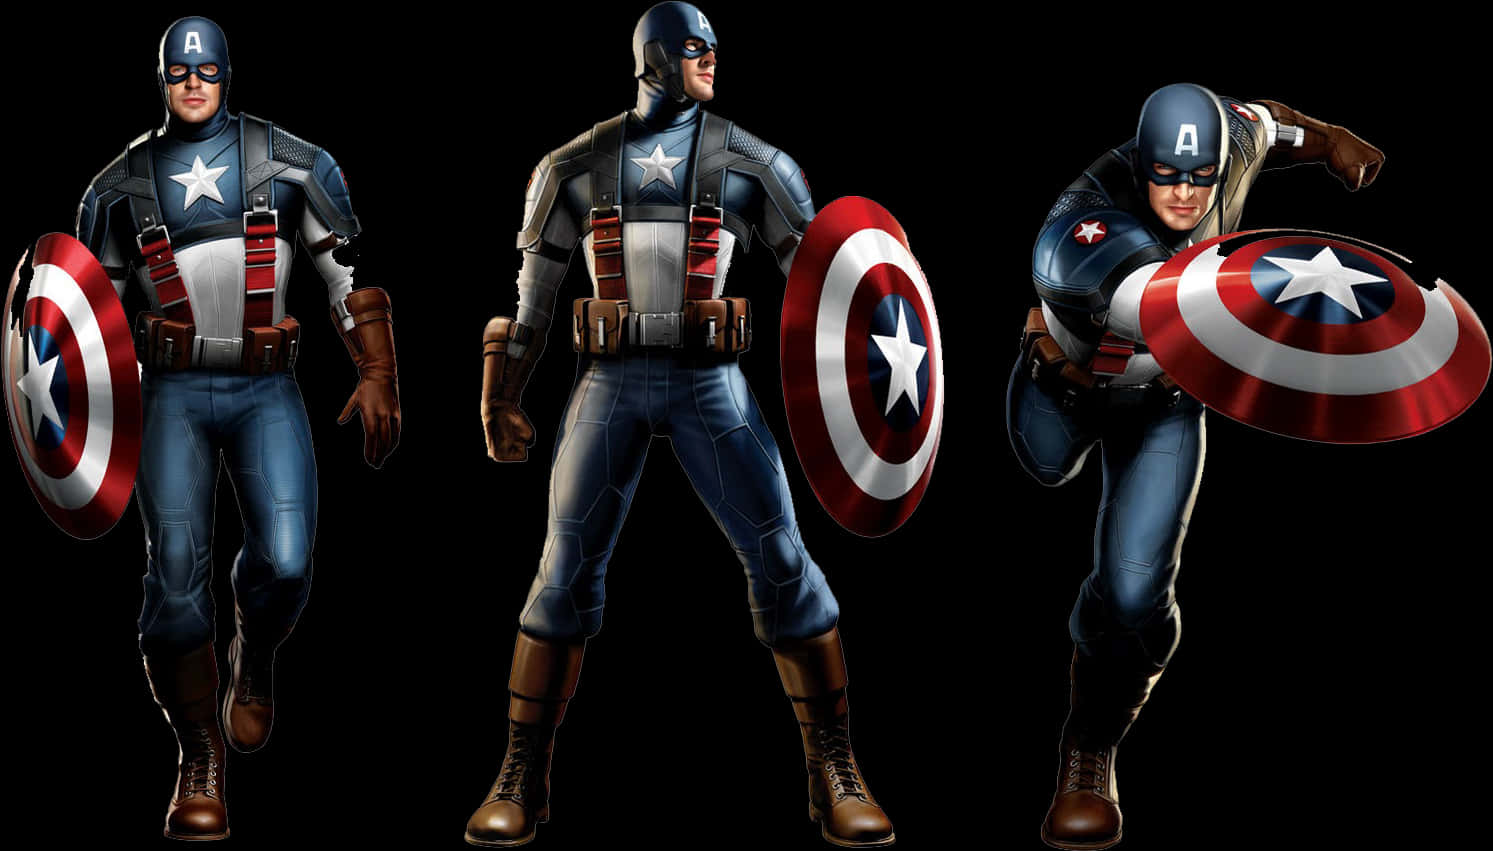 A Group Of Men In Superhero Clothing